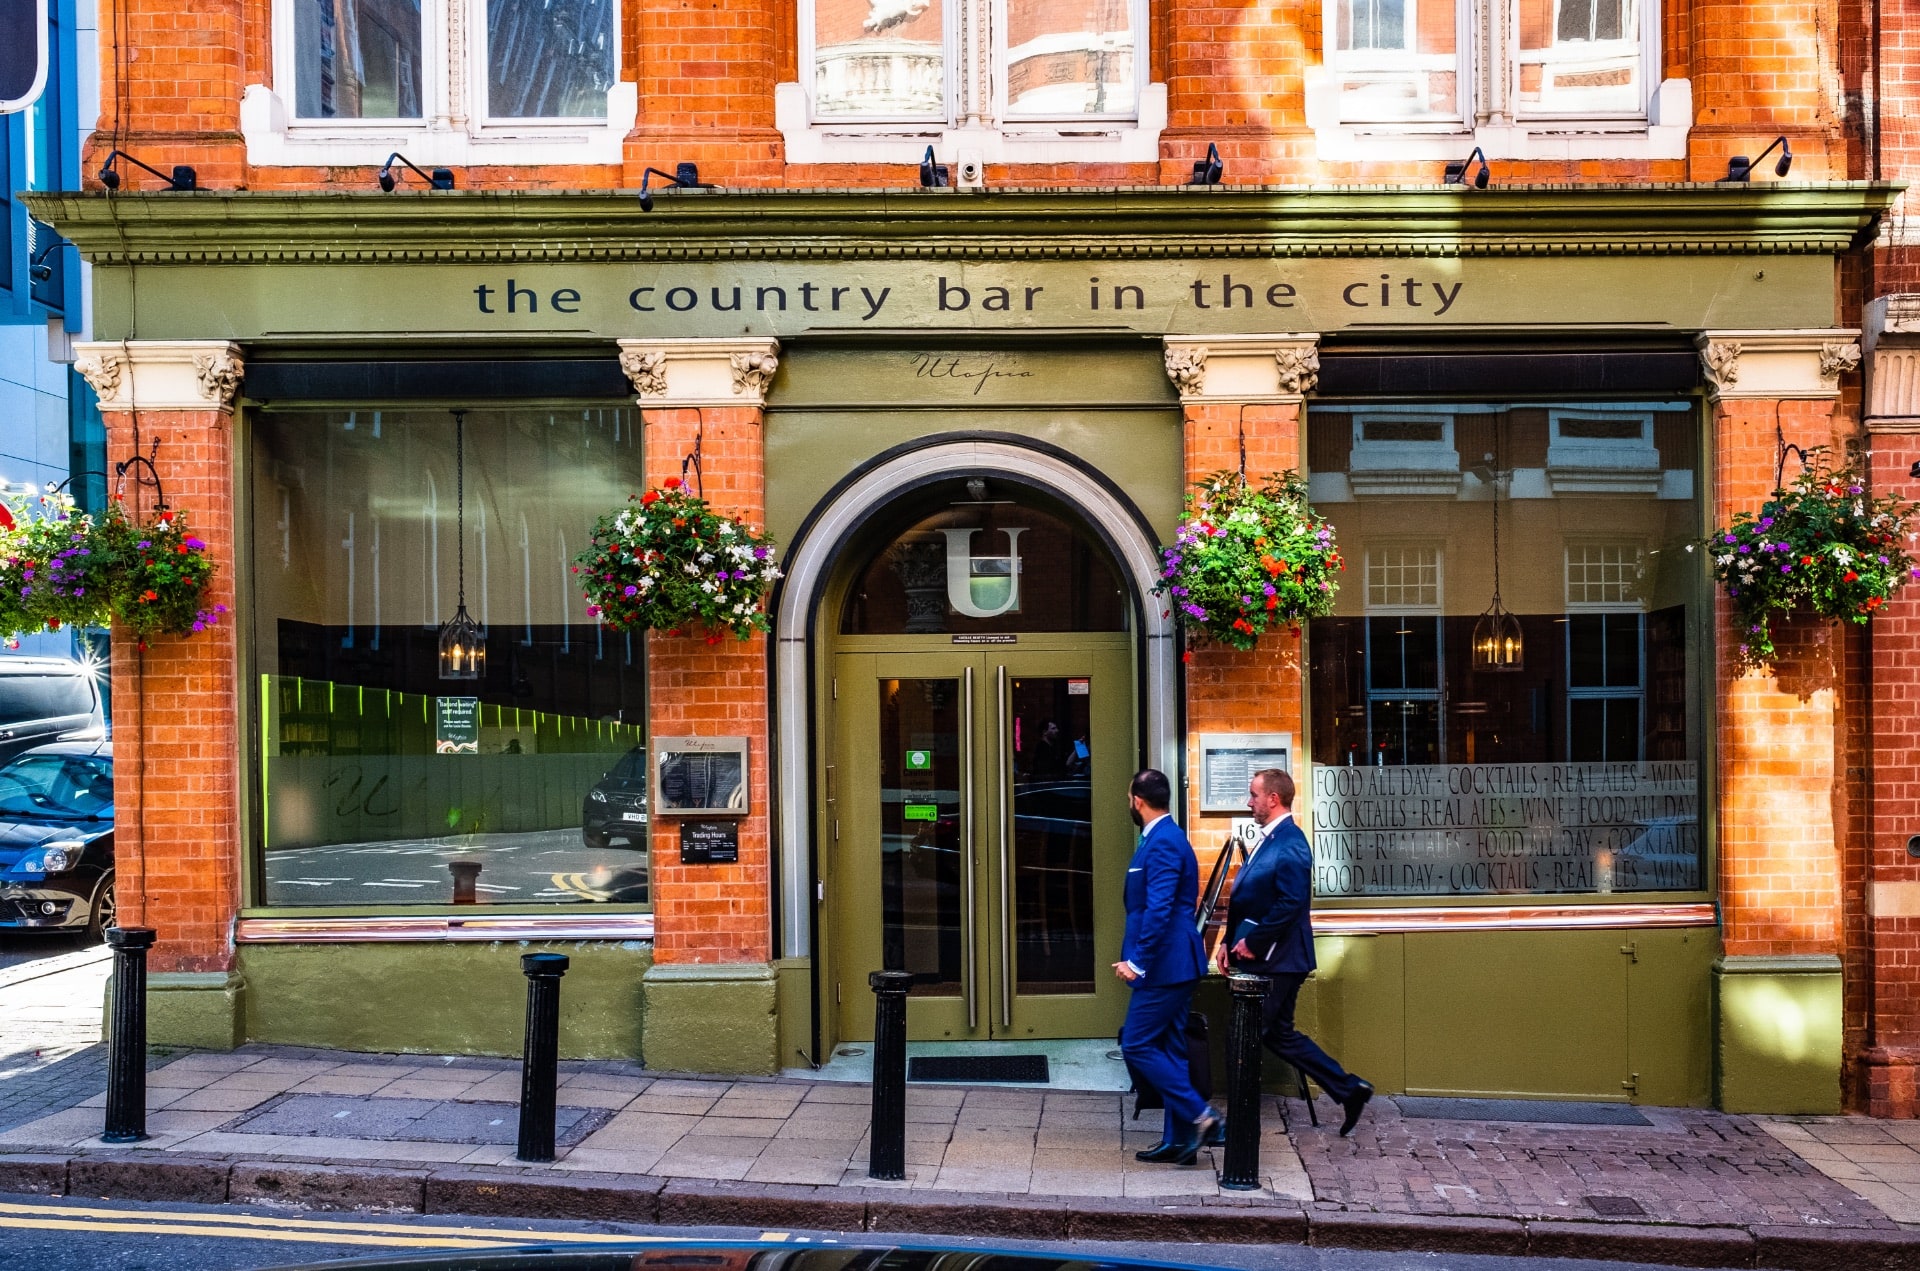 The Country Bar in the City.